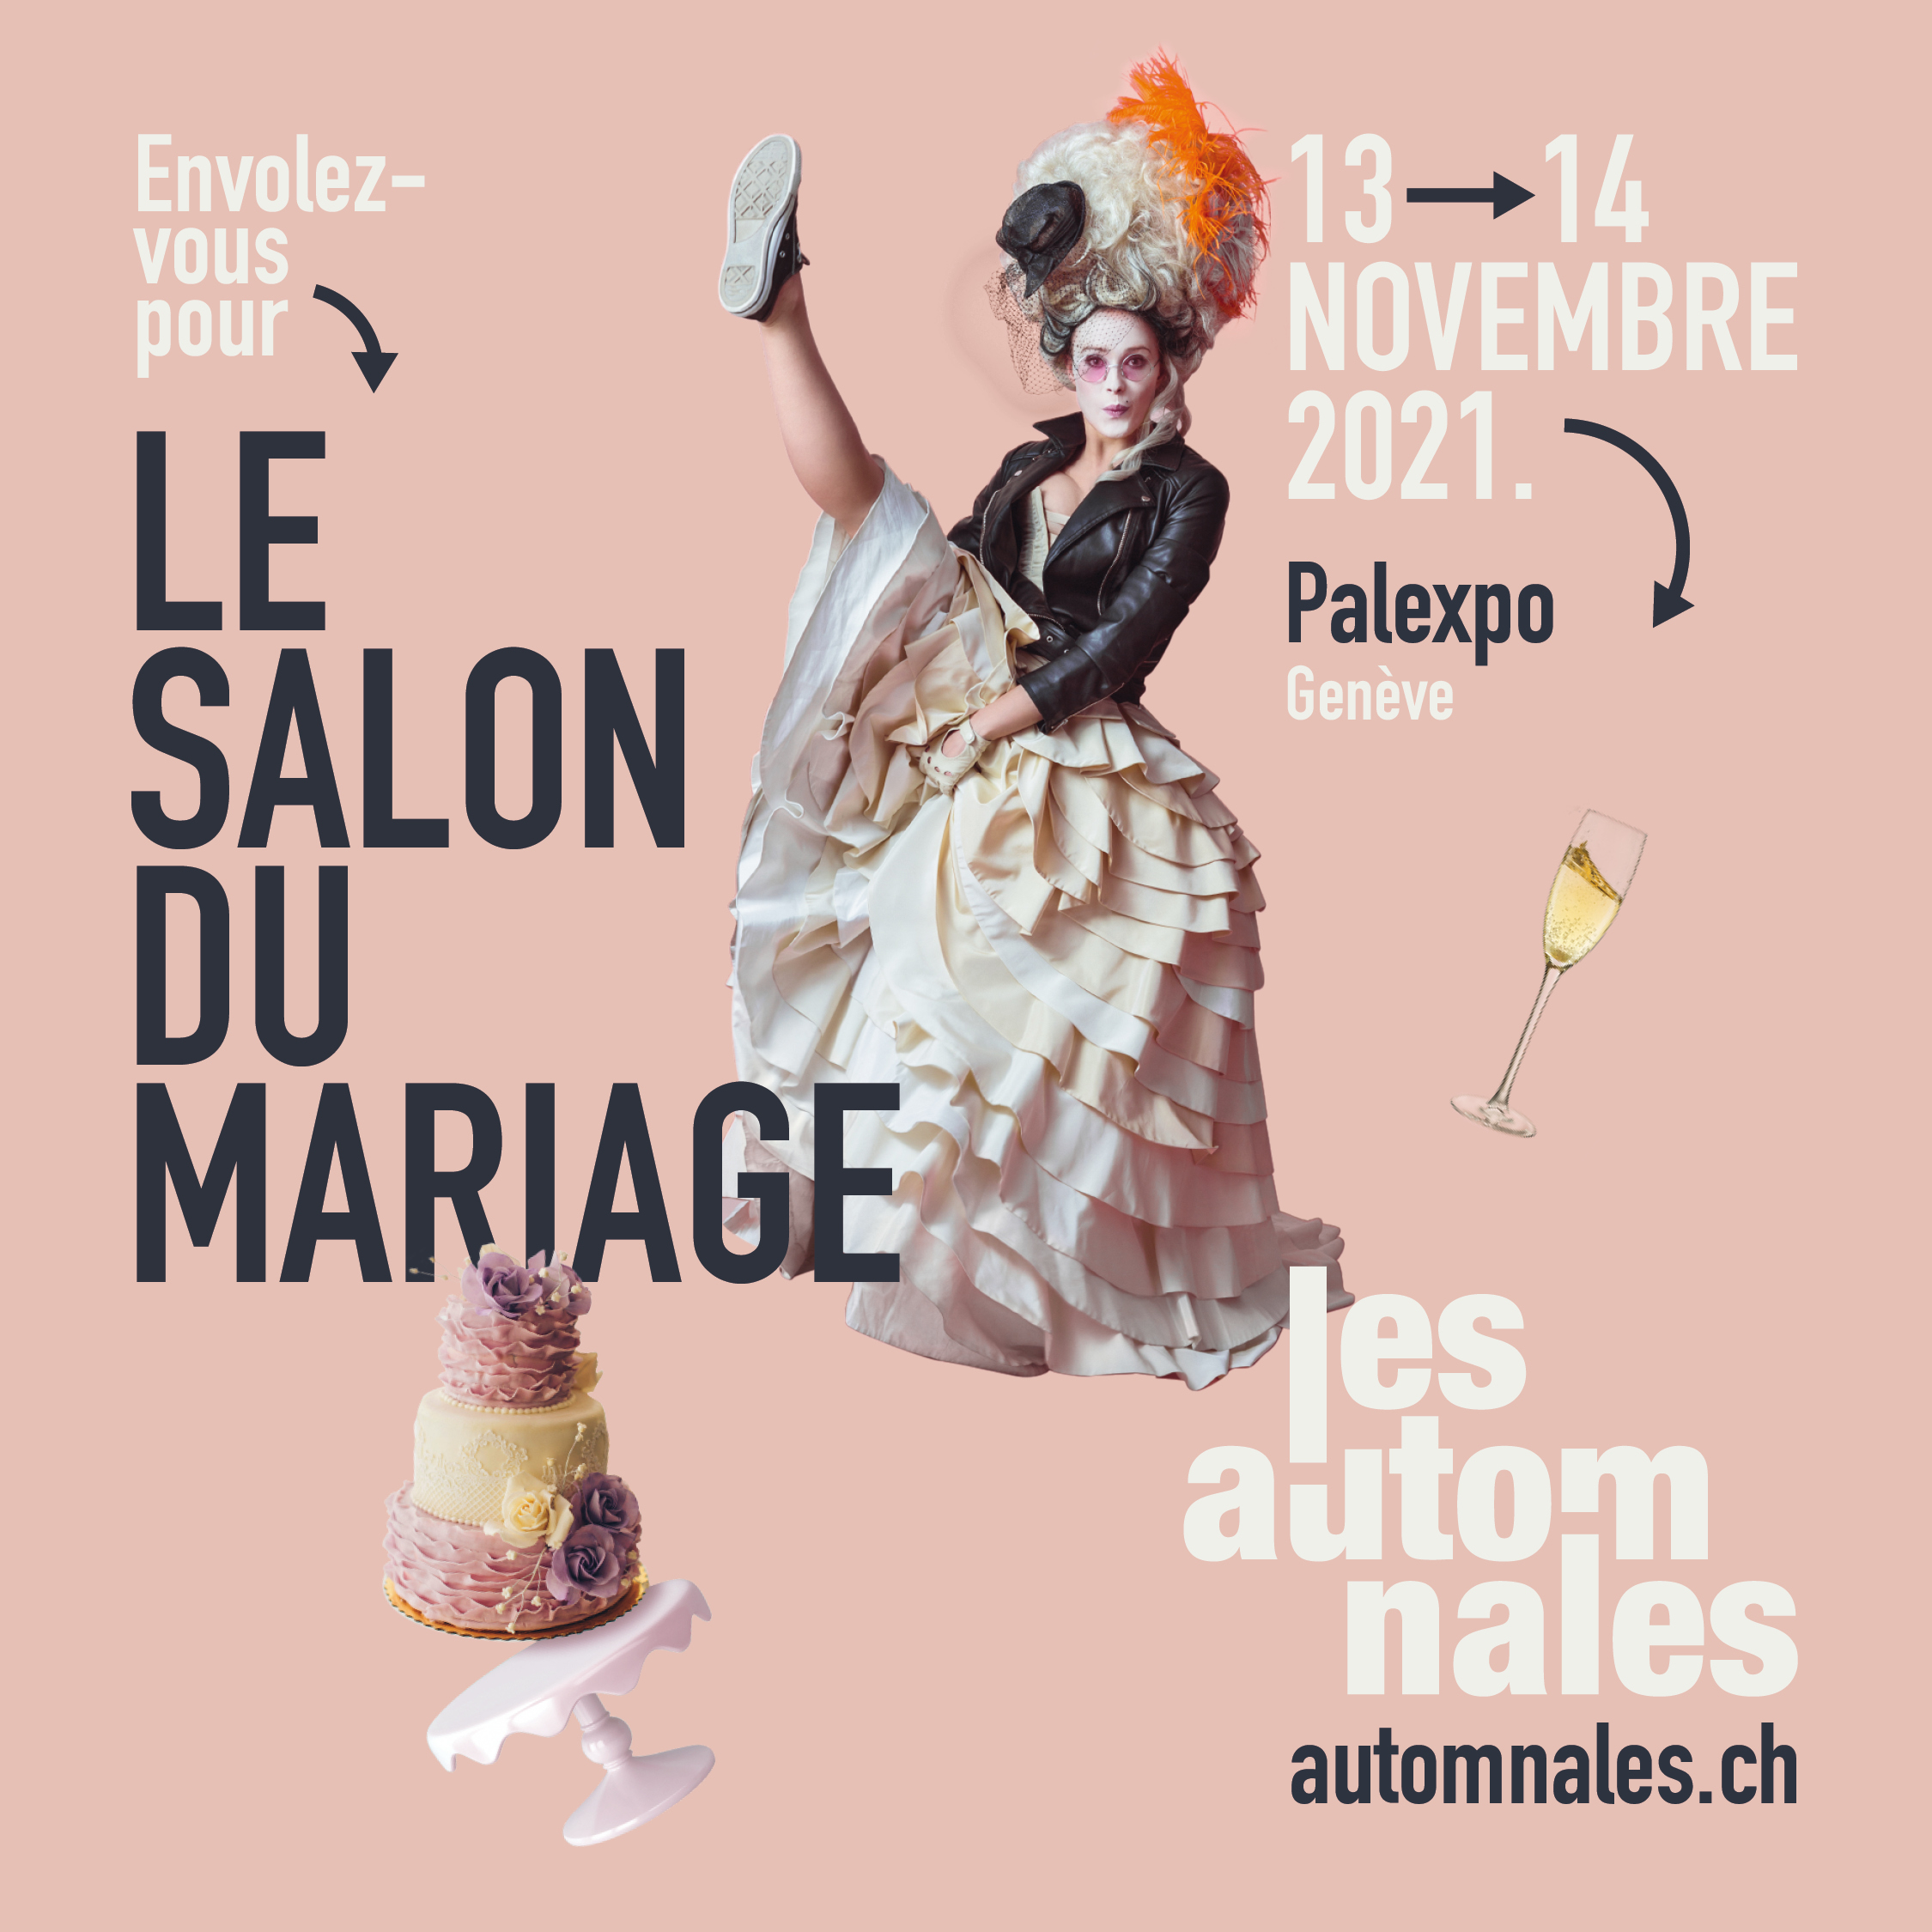 Present twice at Automnales thanks to this second partnership with Palexpo and Salon du Mariage